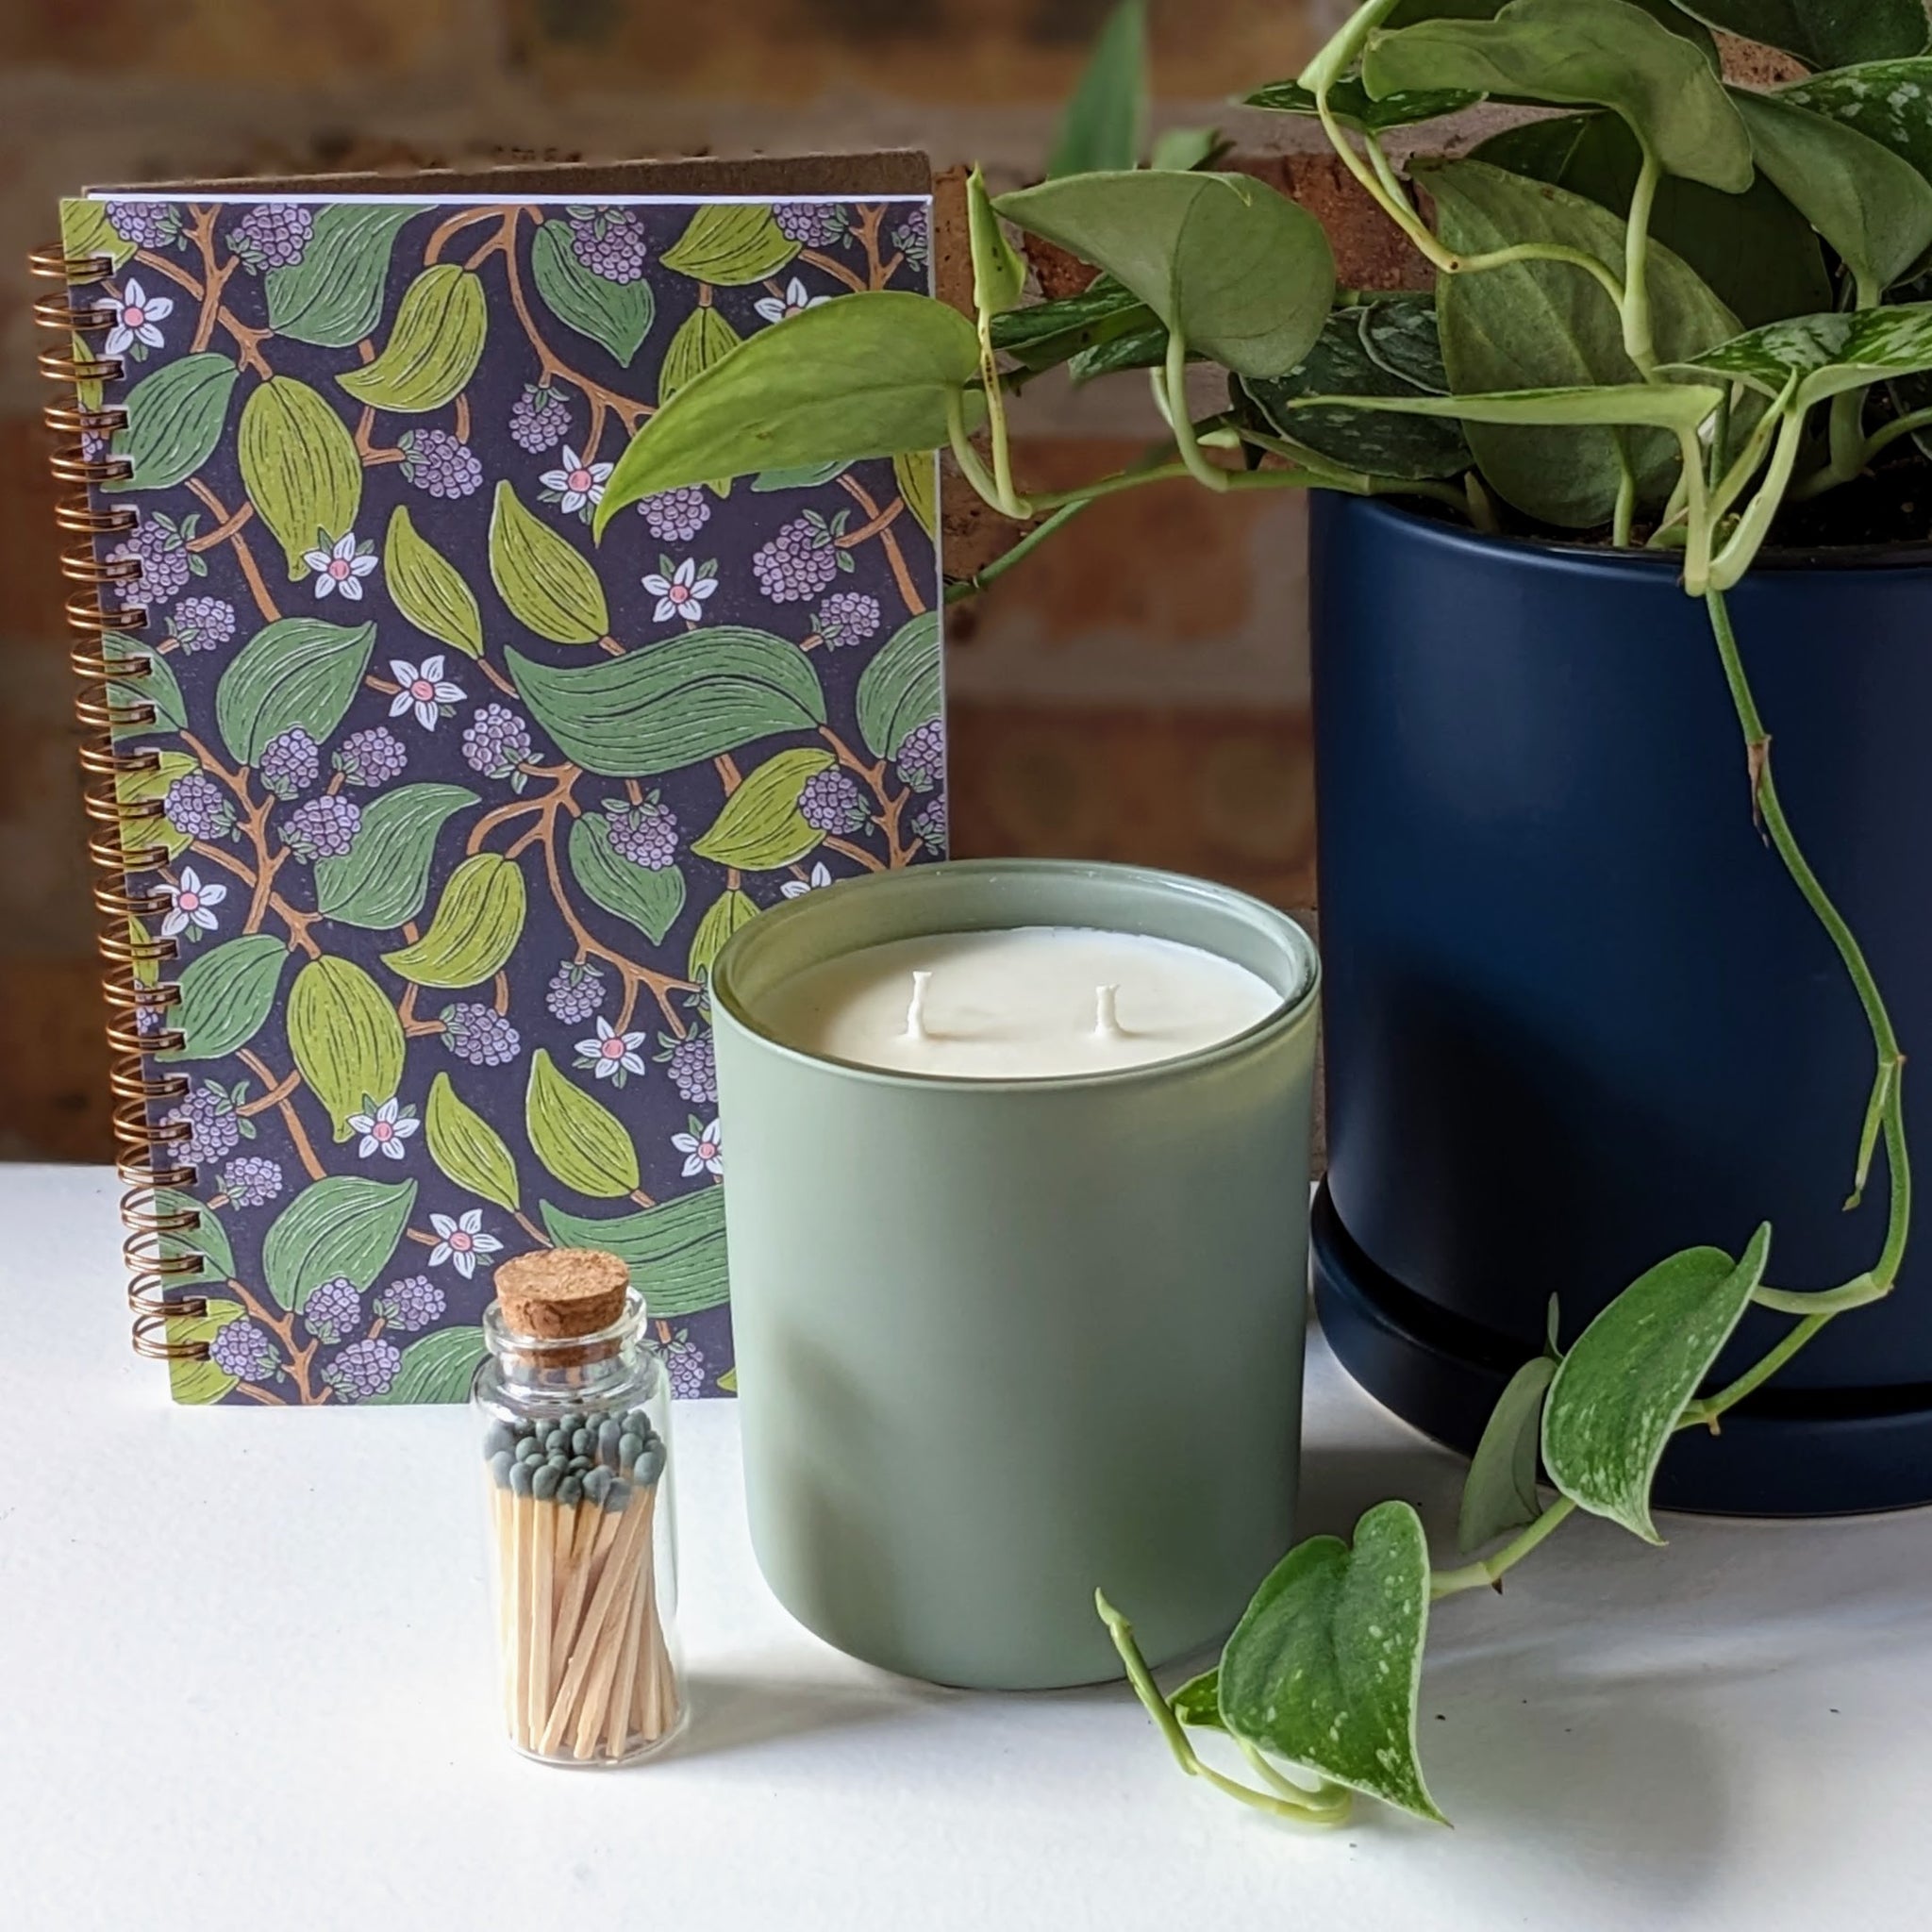 Image of notebook with flowers and leaves design, candle with sage green container, matches in a small glass bottle and pothos in a dark pot for a slow living scene